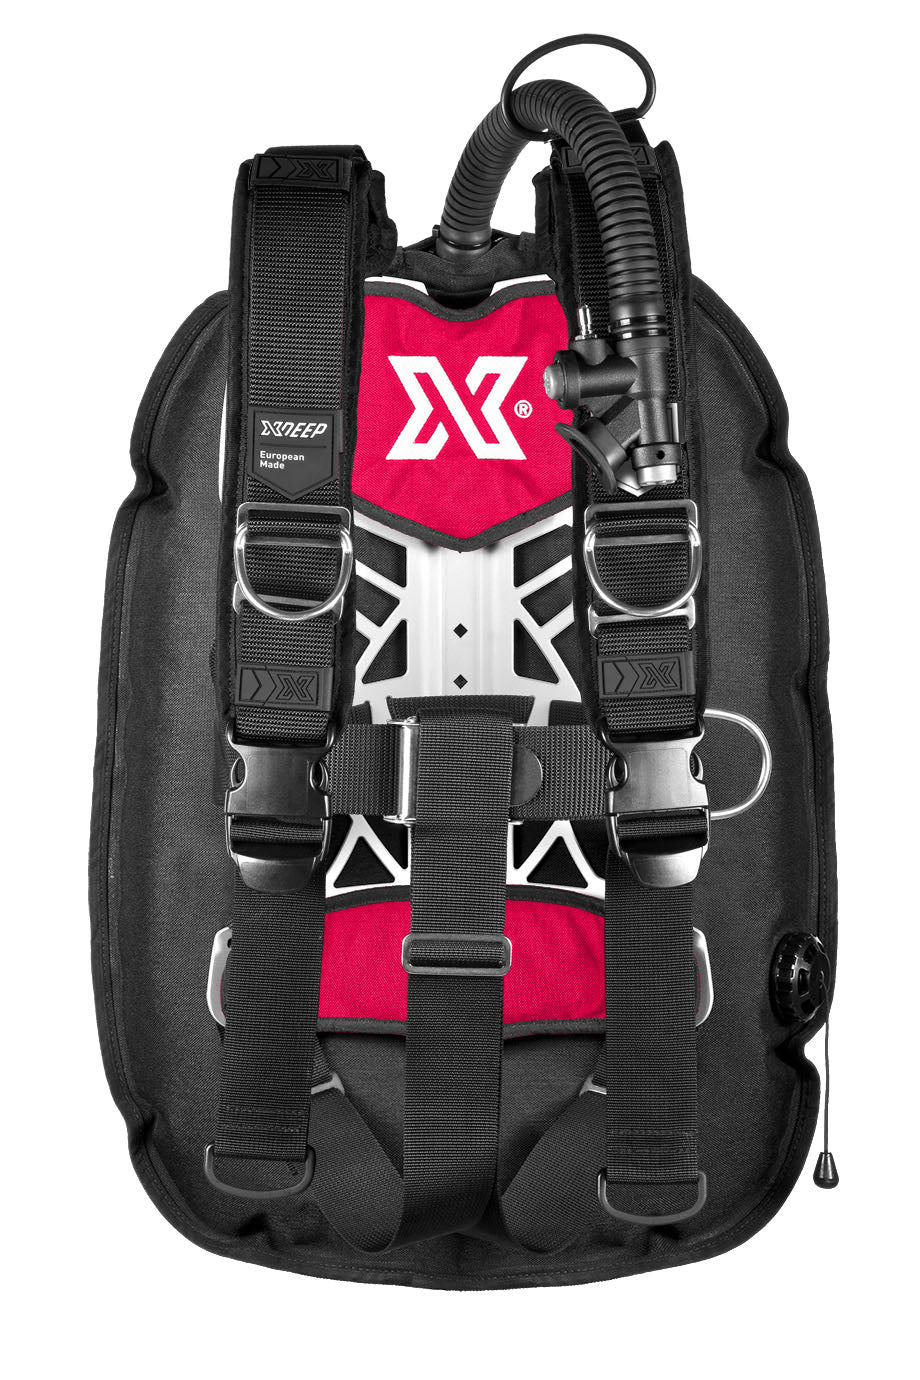 XDEEP XDEEP GHOST Full Setup with Standard or Deluxe harness Pink / Deluxe / Small - Oyster Diving